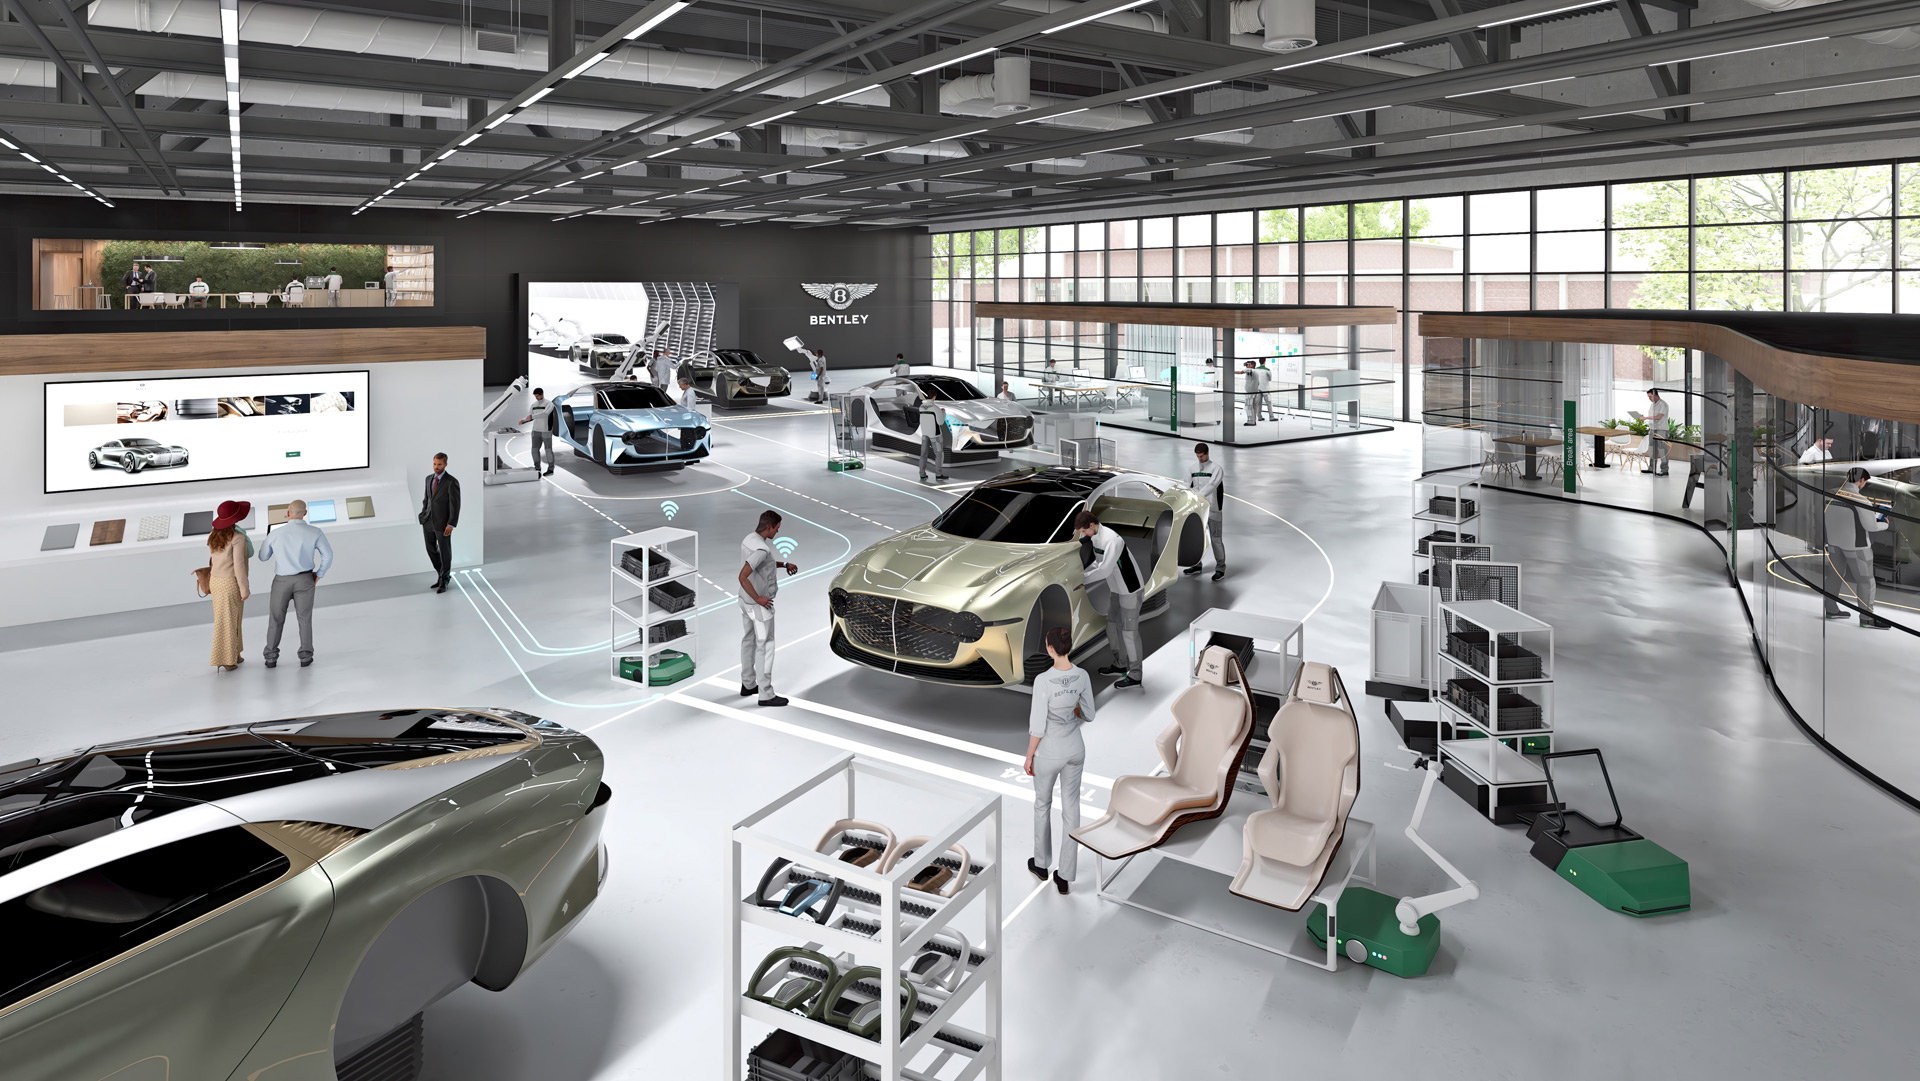 Bentley secures plans for first EV in 2025, carbon-neutrality in 2030Bentley secures plans for first EV in 2025, carbon-neutrality in 2030